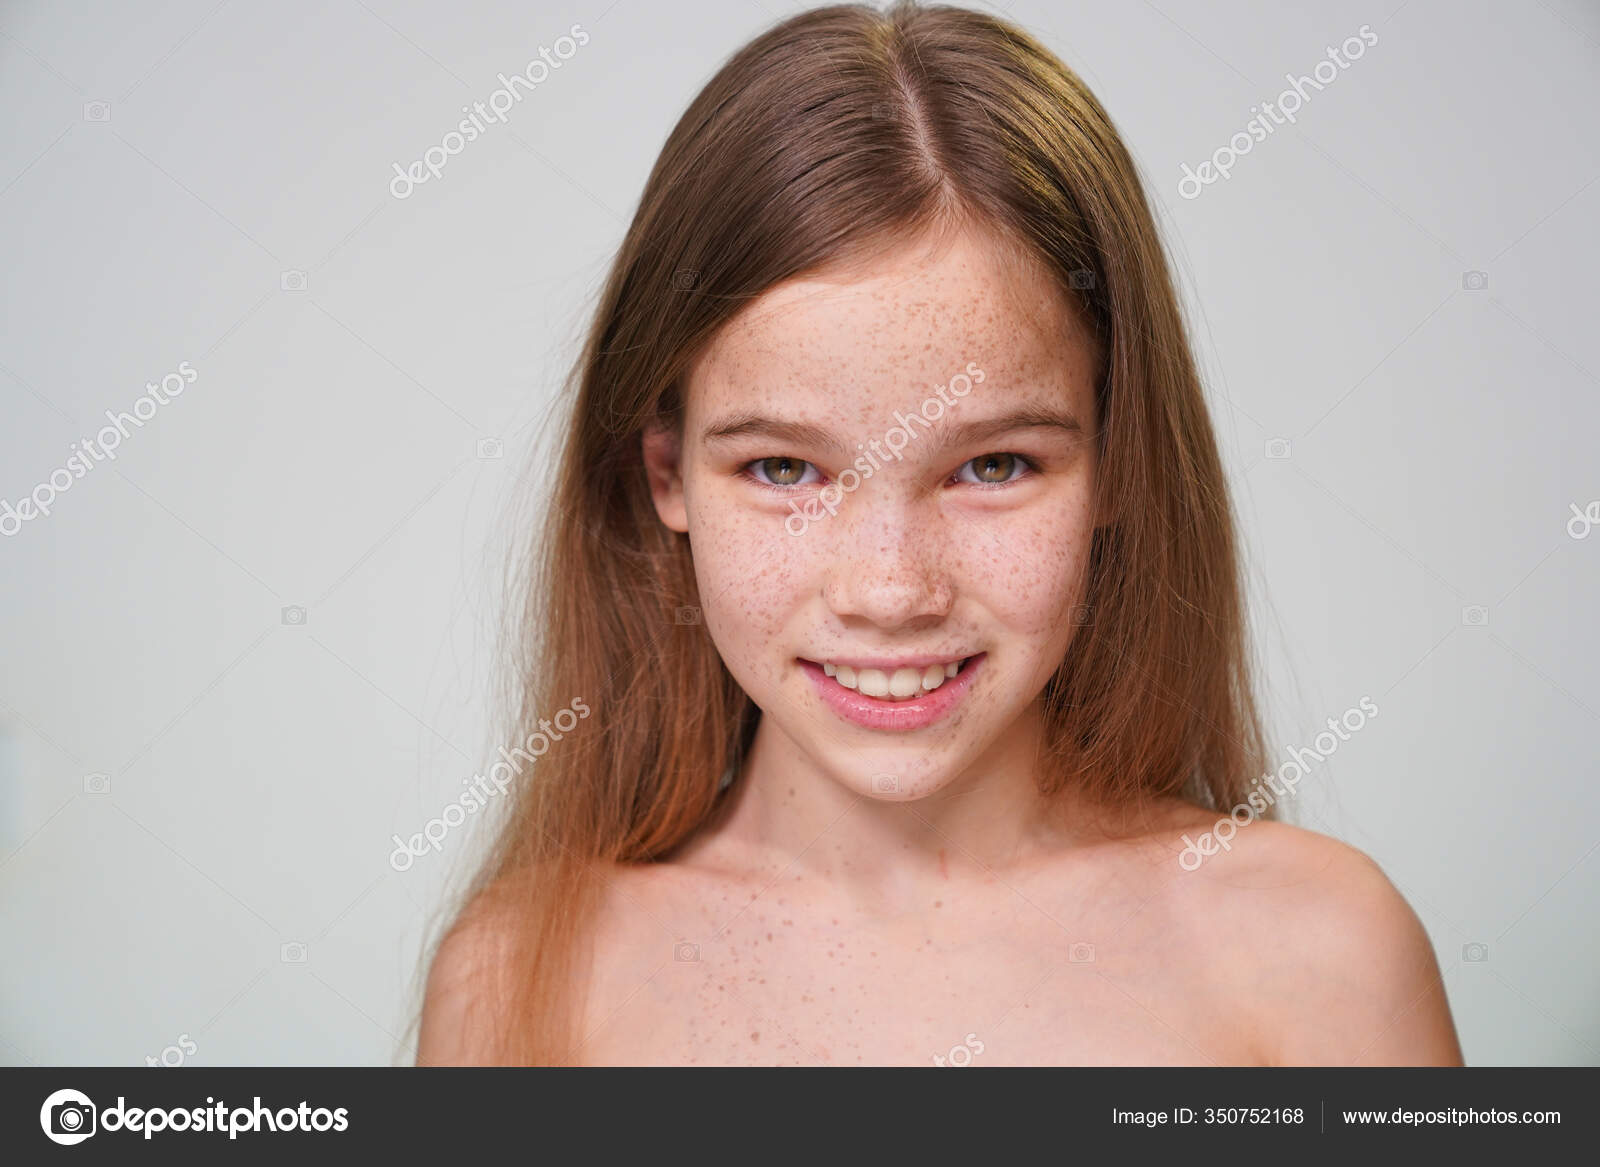 Blond Hair Teen Girl with Freckles - wide 9